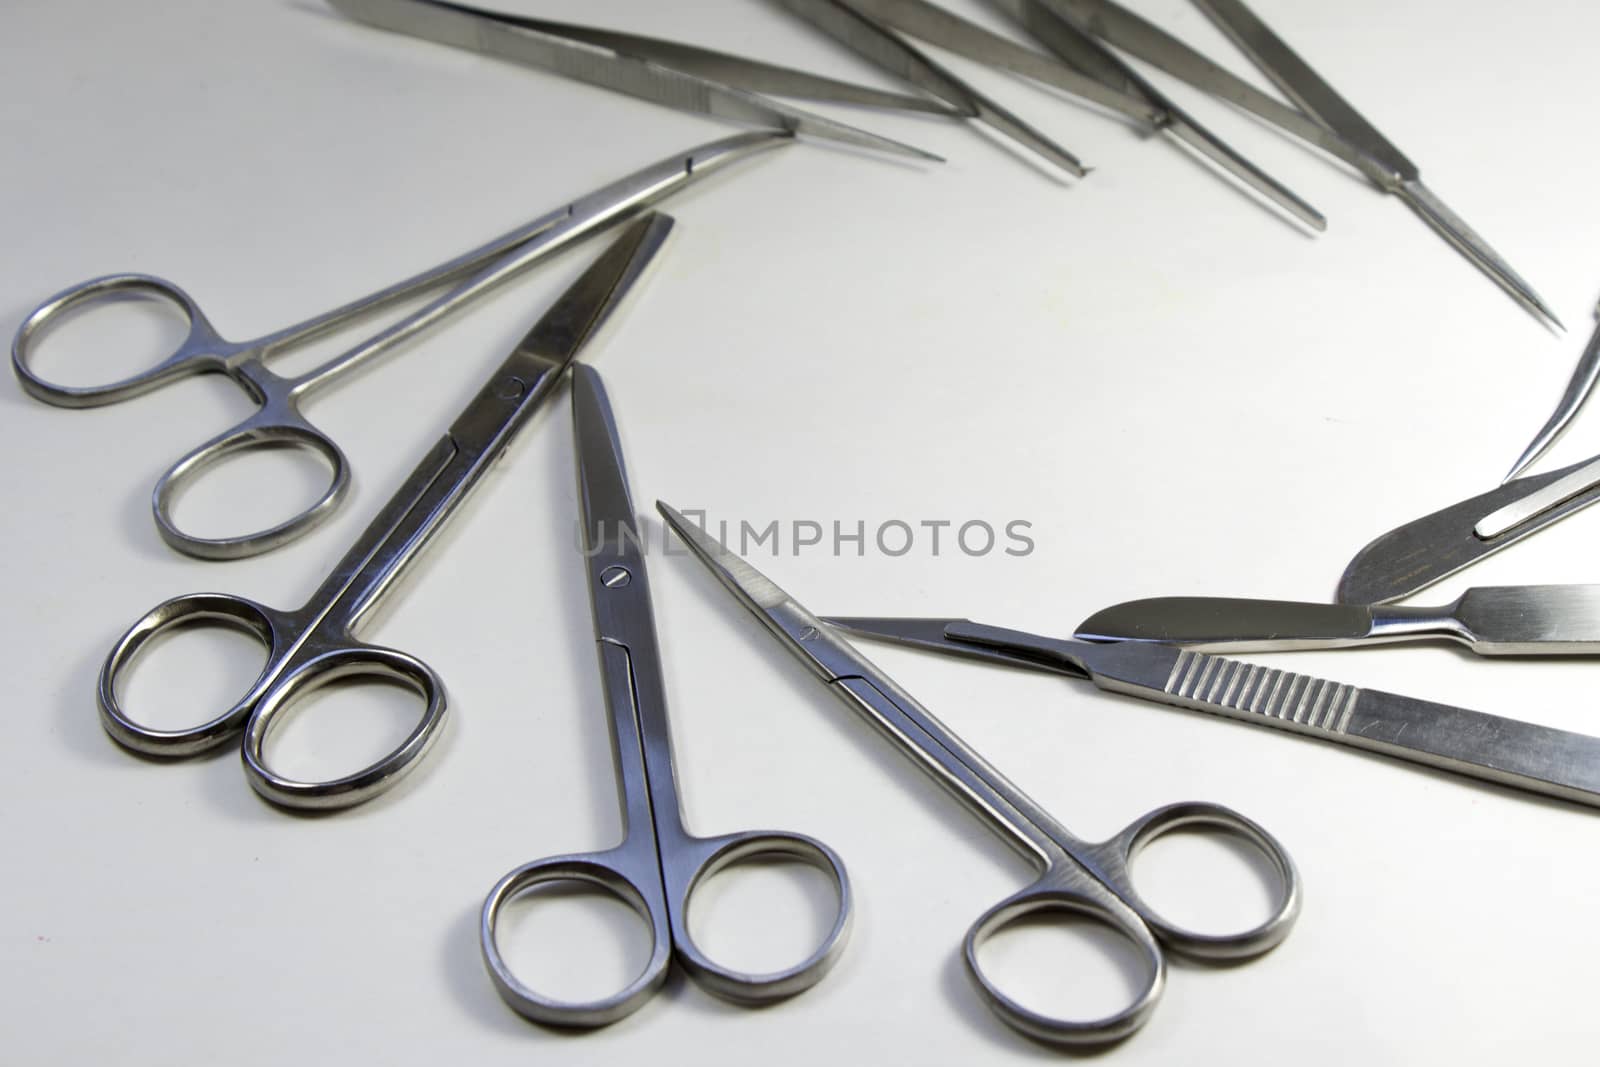 Dissection Kit - Premium Quality Stainless Steel Tools for Medical Students of Anatomy. Surgery instruments. by Taidundua